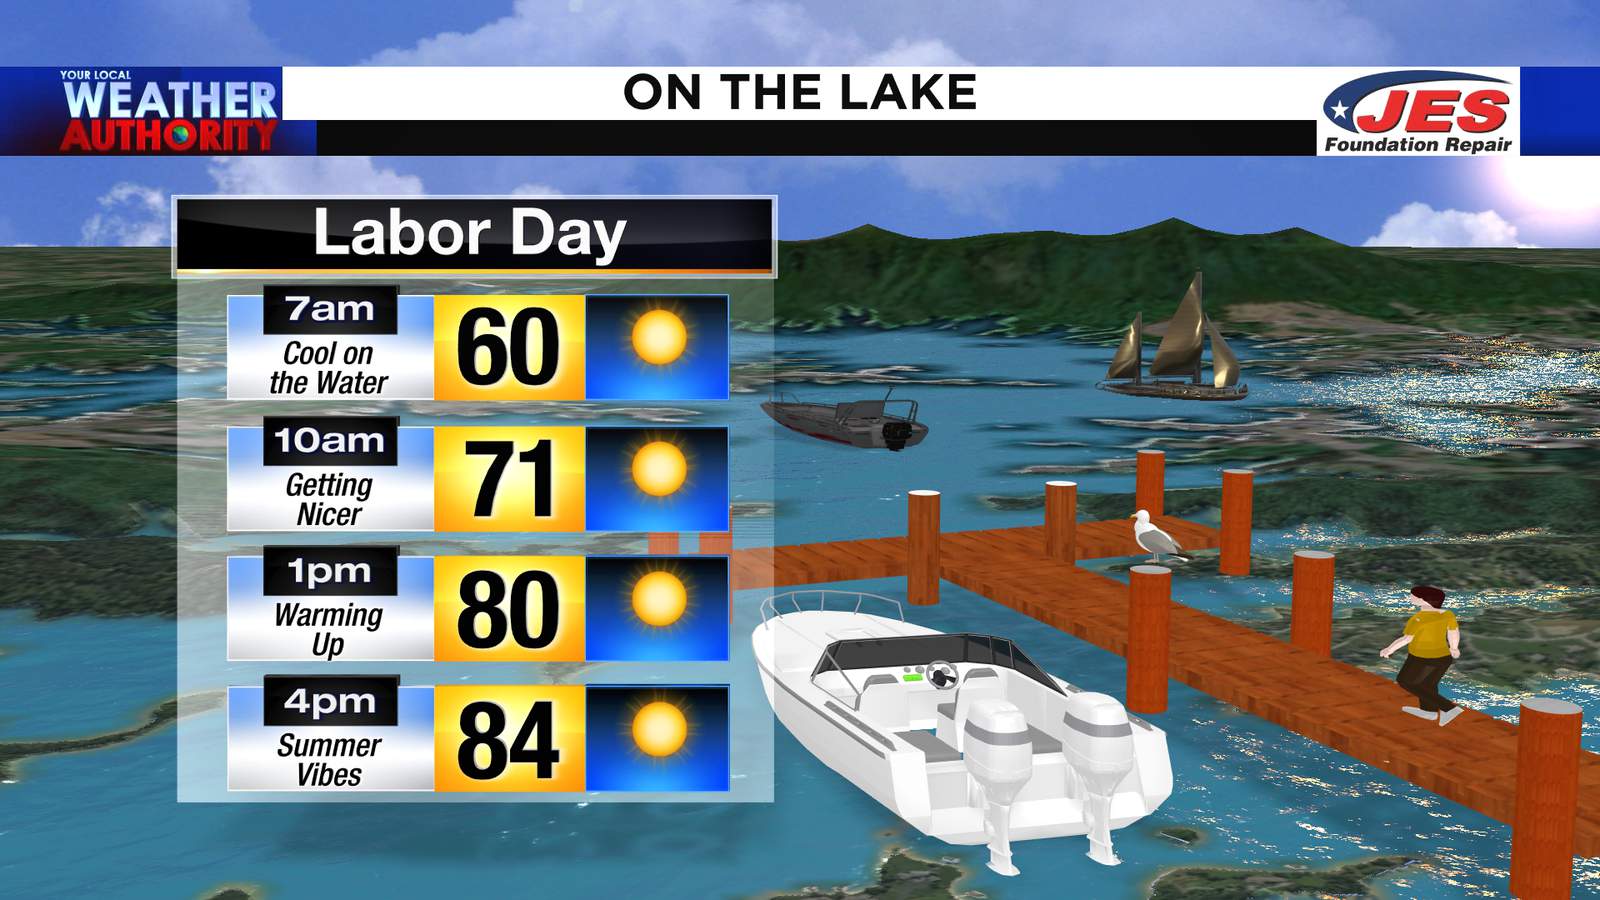 Lovely Labor Day followed up by more humidity, storms later this week